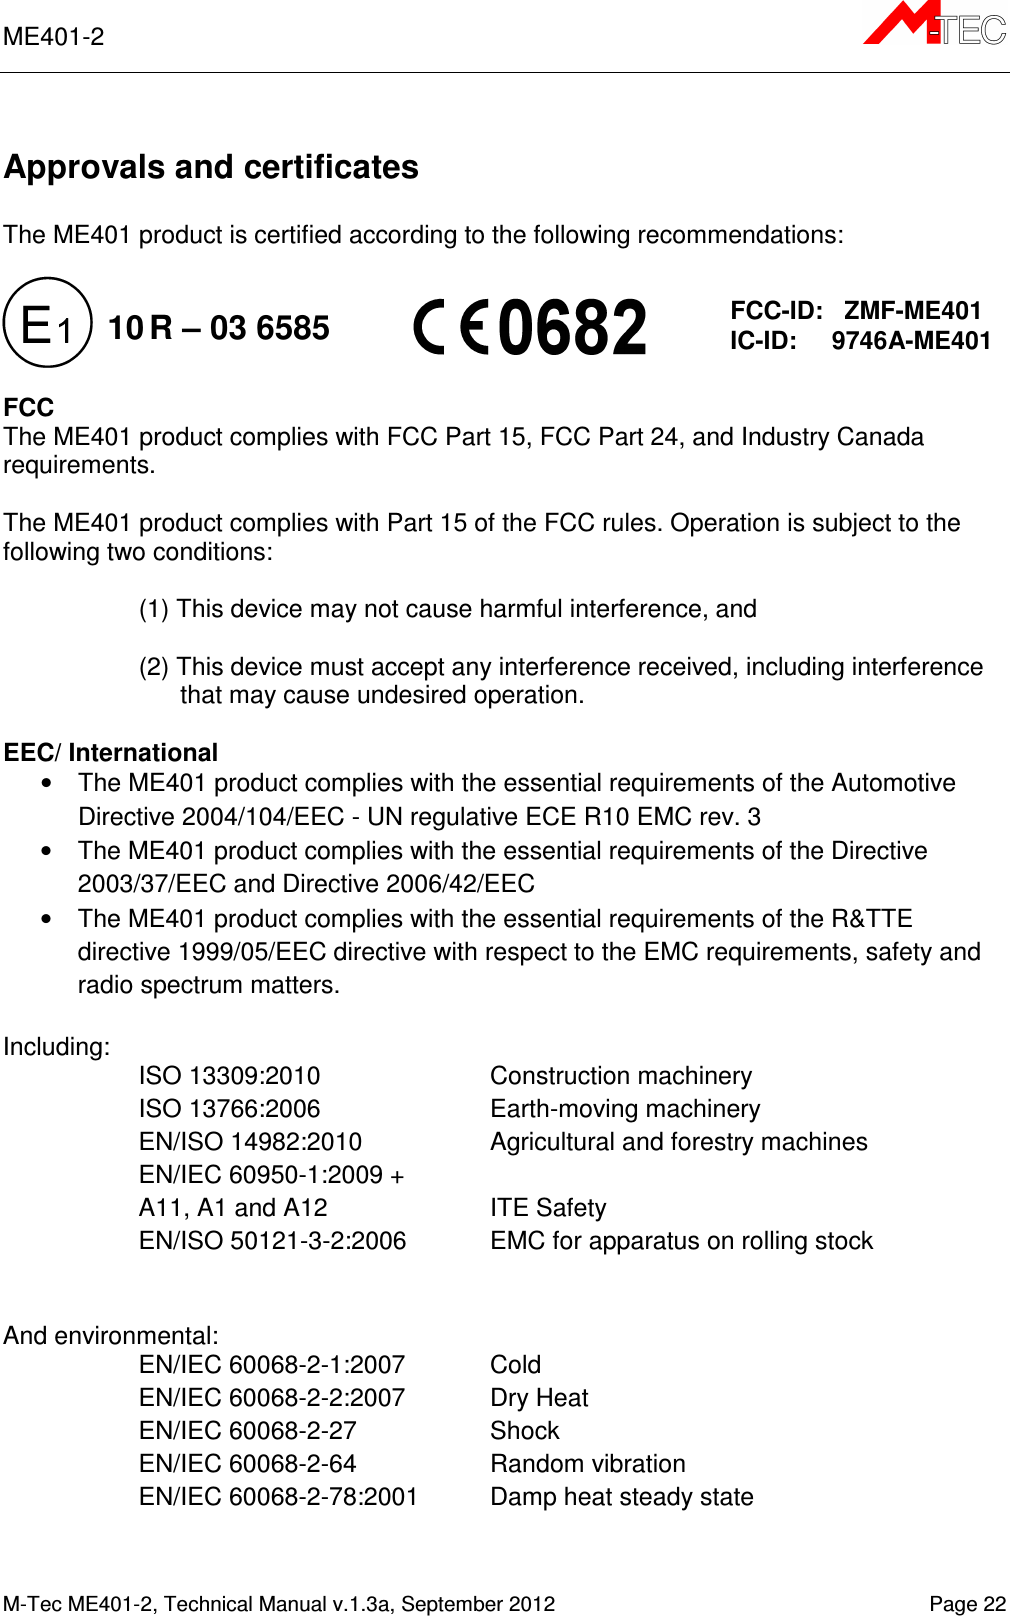 ME401-2      M-Tec ME401-2, Technical Manual v.1.3a, September 2012   Page 22  Approvals and certificates  The ME401 product is certified according to the following recommendations:            FCC The ME401 product complies with FCC Part 15, FCC Part 24, and Industry Canada requirements.  The ME401 product complies with Part 15 of the FCC rules. Operation is subject to the following two conditions:  (1) This device may not cause harmful interference, and  (2) This device must accept any interference received, including interference that may cause undesired operation.  EEC/ International •  The ME401 product complies with the essential requirements of the Automotive Directive 2004/104/EEC - UN regulative ECE R10 EMC rev. 3 •  The ME401 product complies with the essential requirements of the Directive 2003/37/EEC and Directive 2006/42/EEC •  The ME401 product complies with the essential requirements of the R&amp;TTE directive 1999/05/EEC directive with respect to the EMC requirements, safety and radio spectrum matters.  Including: ISO 13309:2010  Construction machinery ISO 13766:2006   Earth-moving machinery EN/ISO 14982:2010  Agricultural and forestry machines EN/IEC 60950-1:2009 +  A11, A1 and A12  ITE Safety EN/ISO 50121-3-2:2006  EMC for apparatus on rolling stock   And environmental: EN/IEC 60068-2-1:2007   Cold EN/IEC 60068-2-2:2007   Dry Heat EN/IEC 60068-2-27   Shock EN/IEC 60068-2-64   Random vibration EN/IEC 60068-2-78:2001  Damp heat steady state    FCC-ID:   ZMF-ME401 IC-ID:     9746A-ME401 10 R – 03 6585 